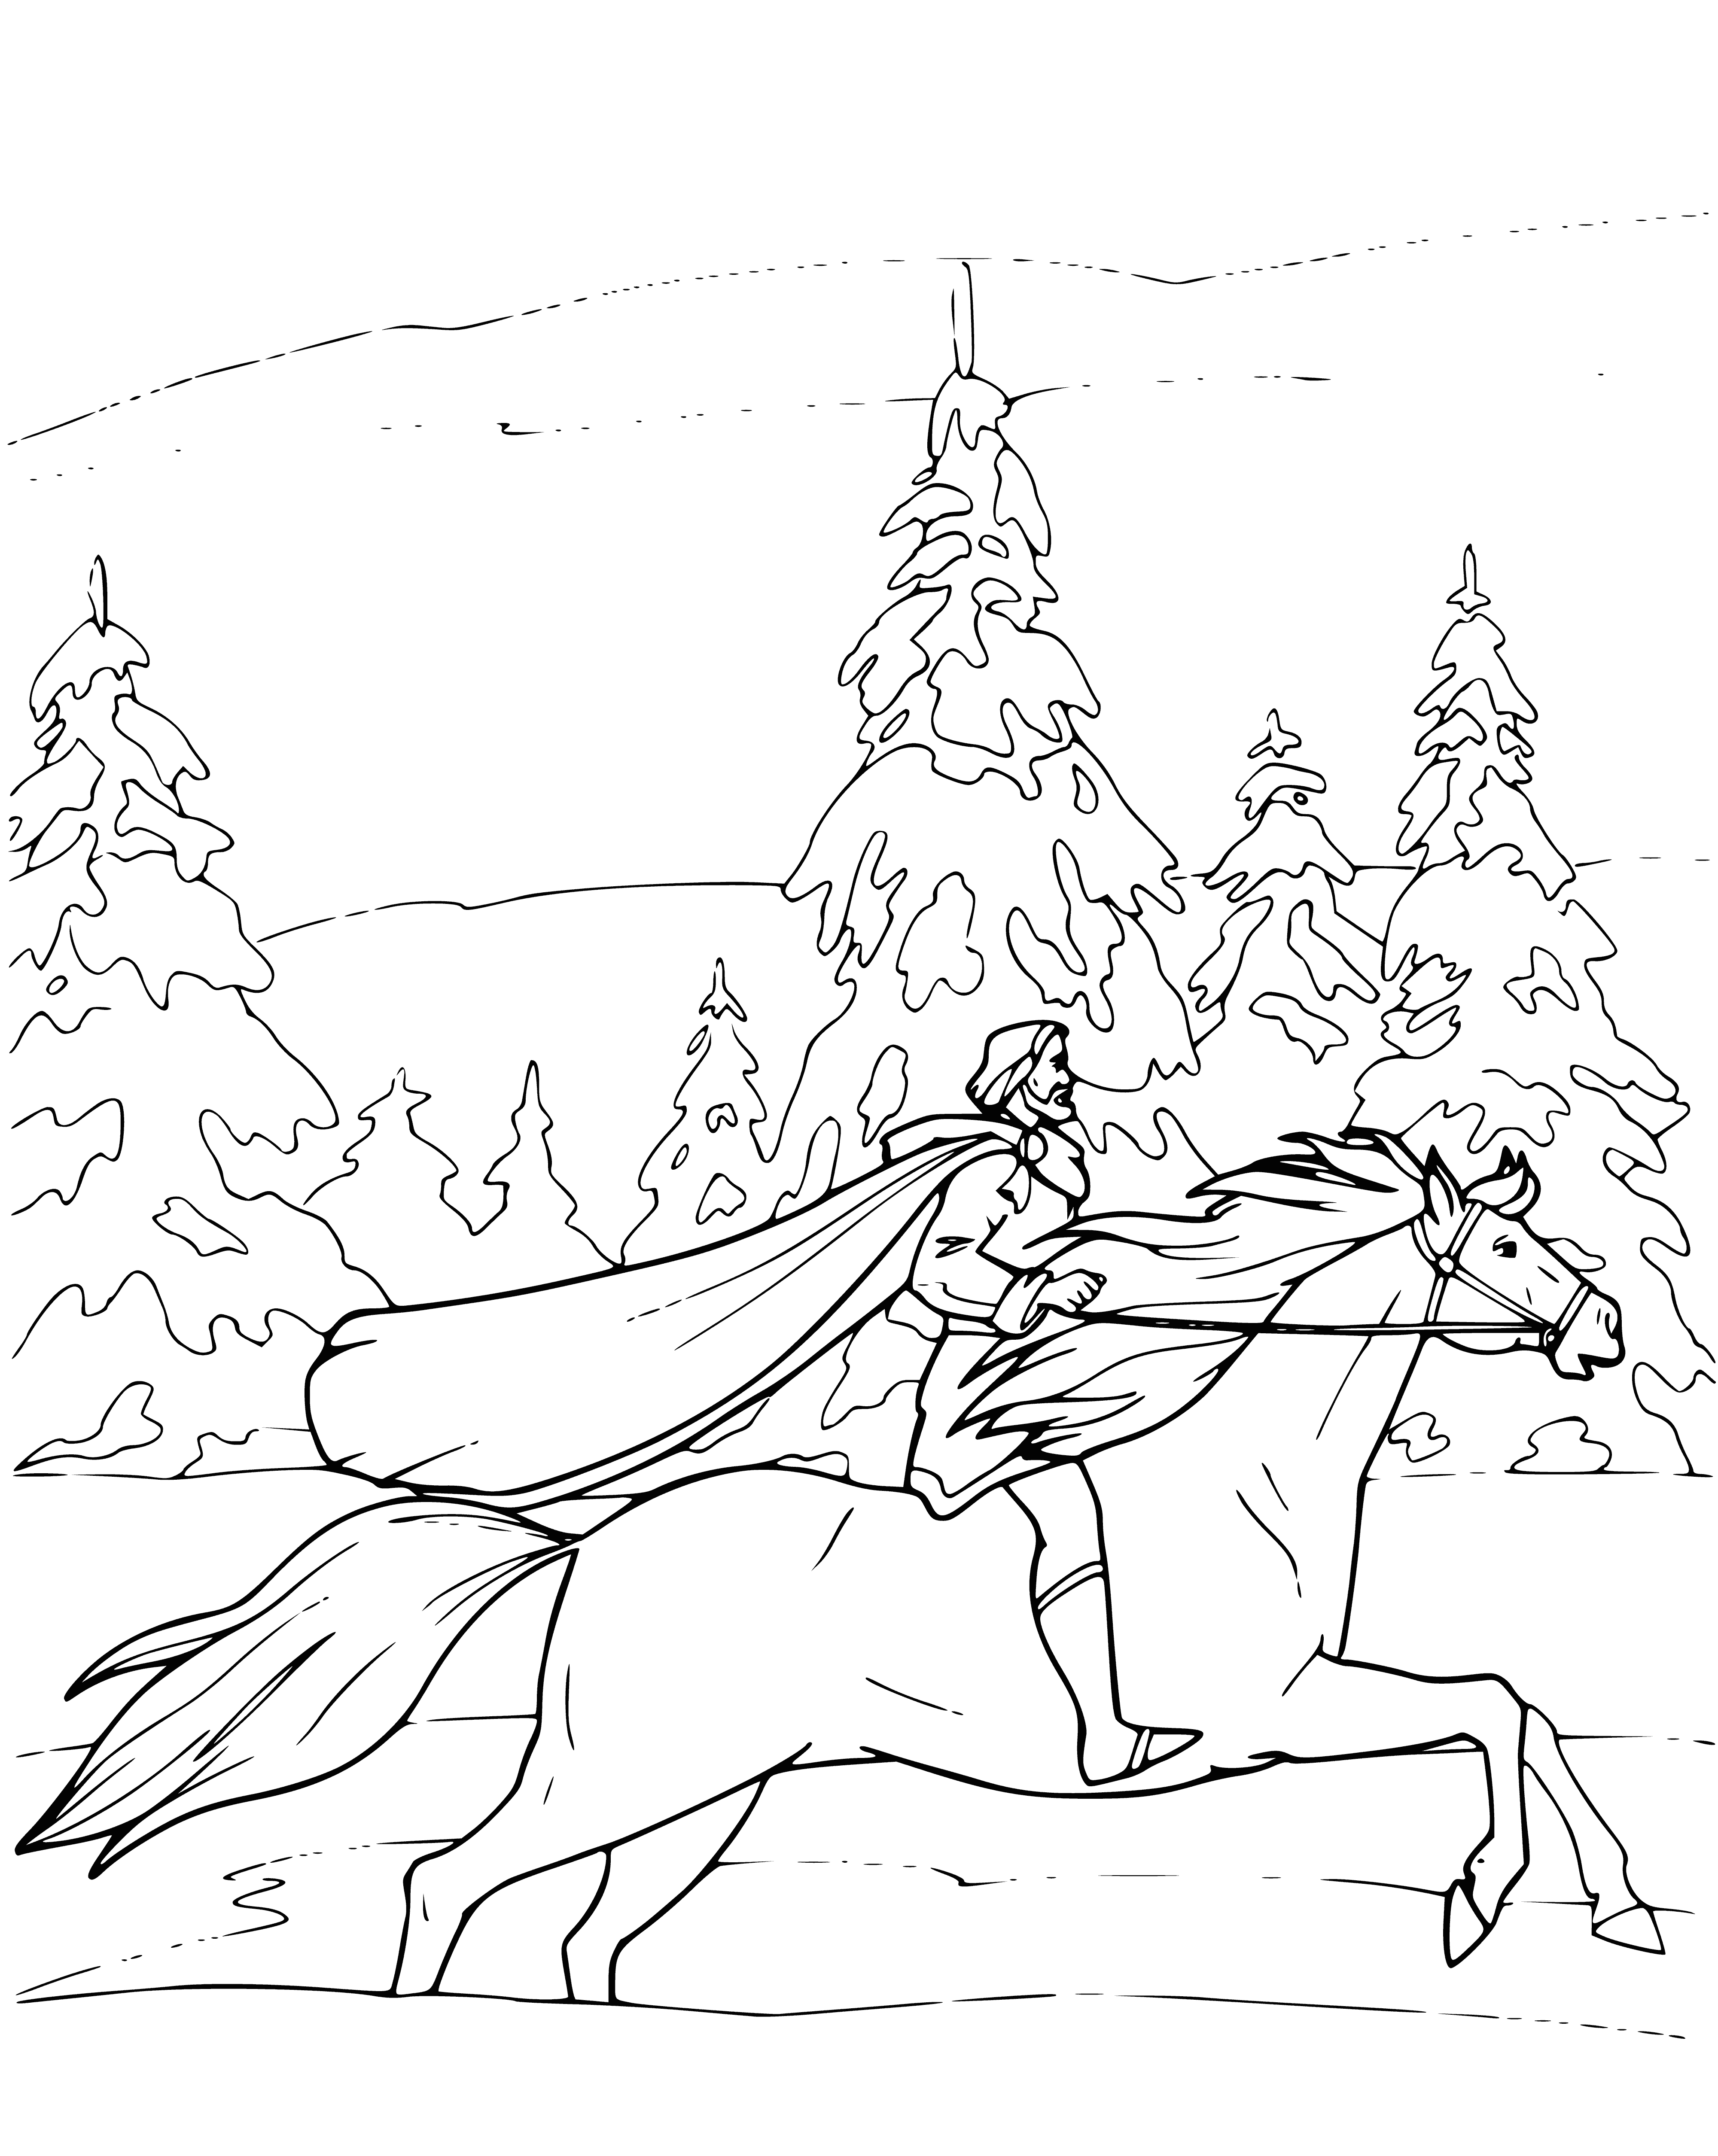 coloring page: Man in armor & cape atop rearing horse, spear pointed down. Face set, eyes fixed on distant object. Tail flying, front legs pawing.